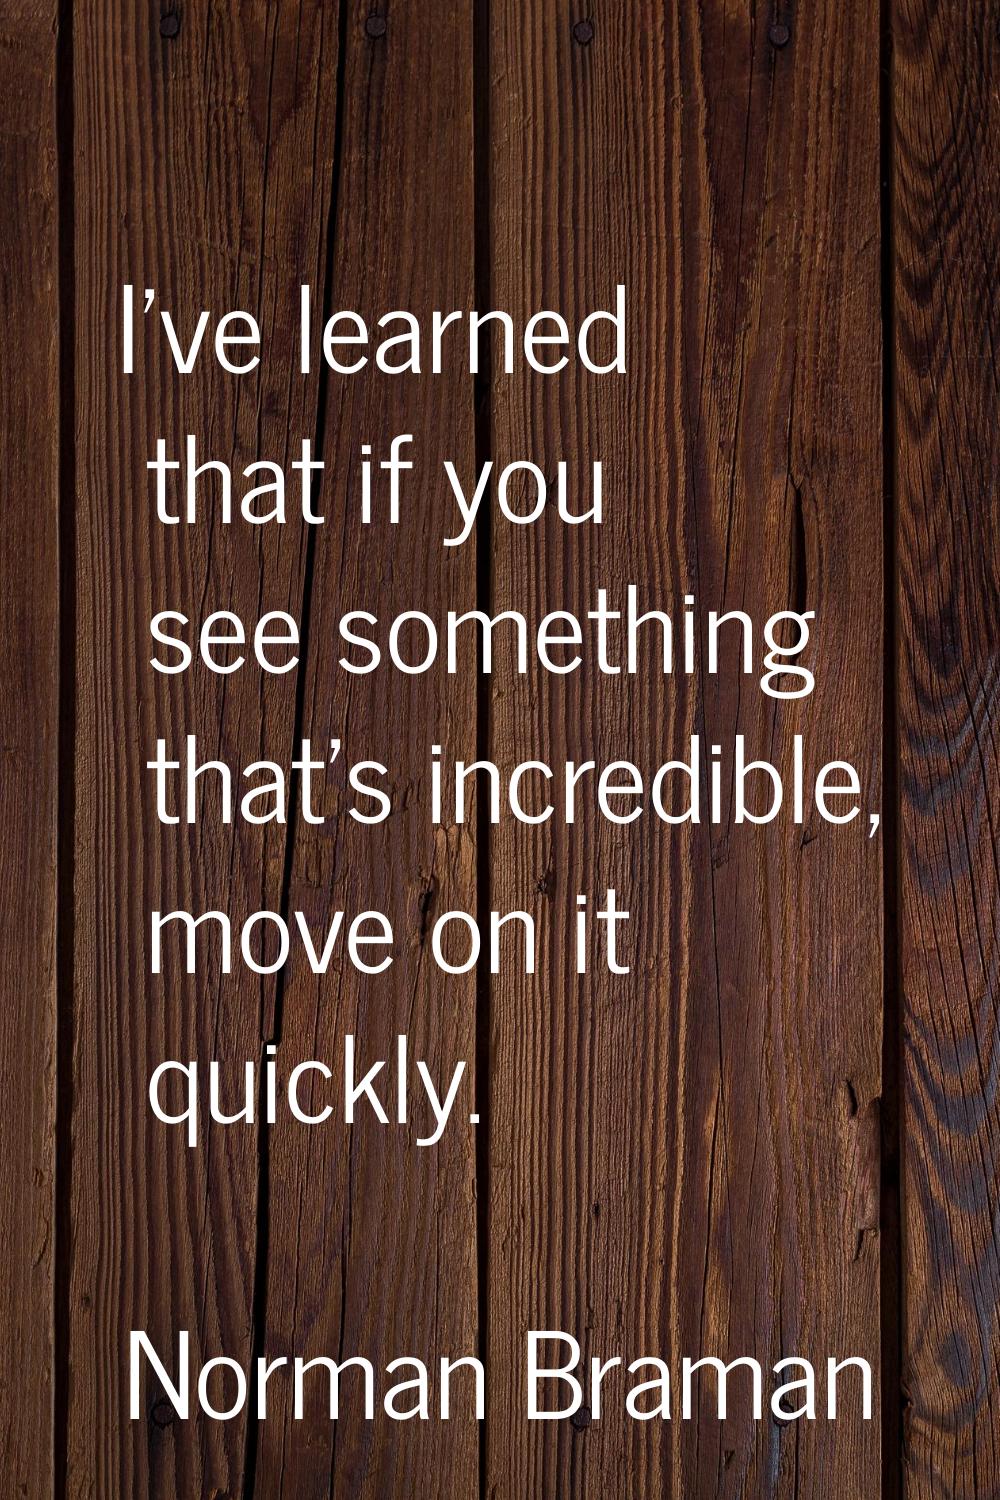 I've learned that if you see something that's incredible, move on it quickly.